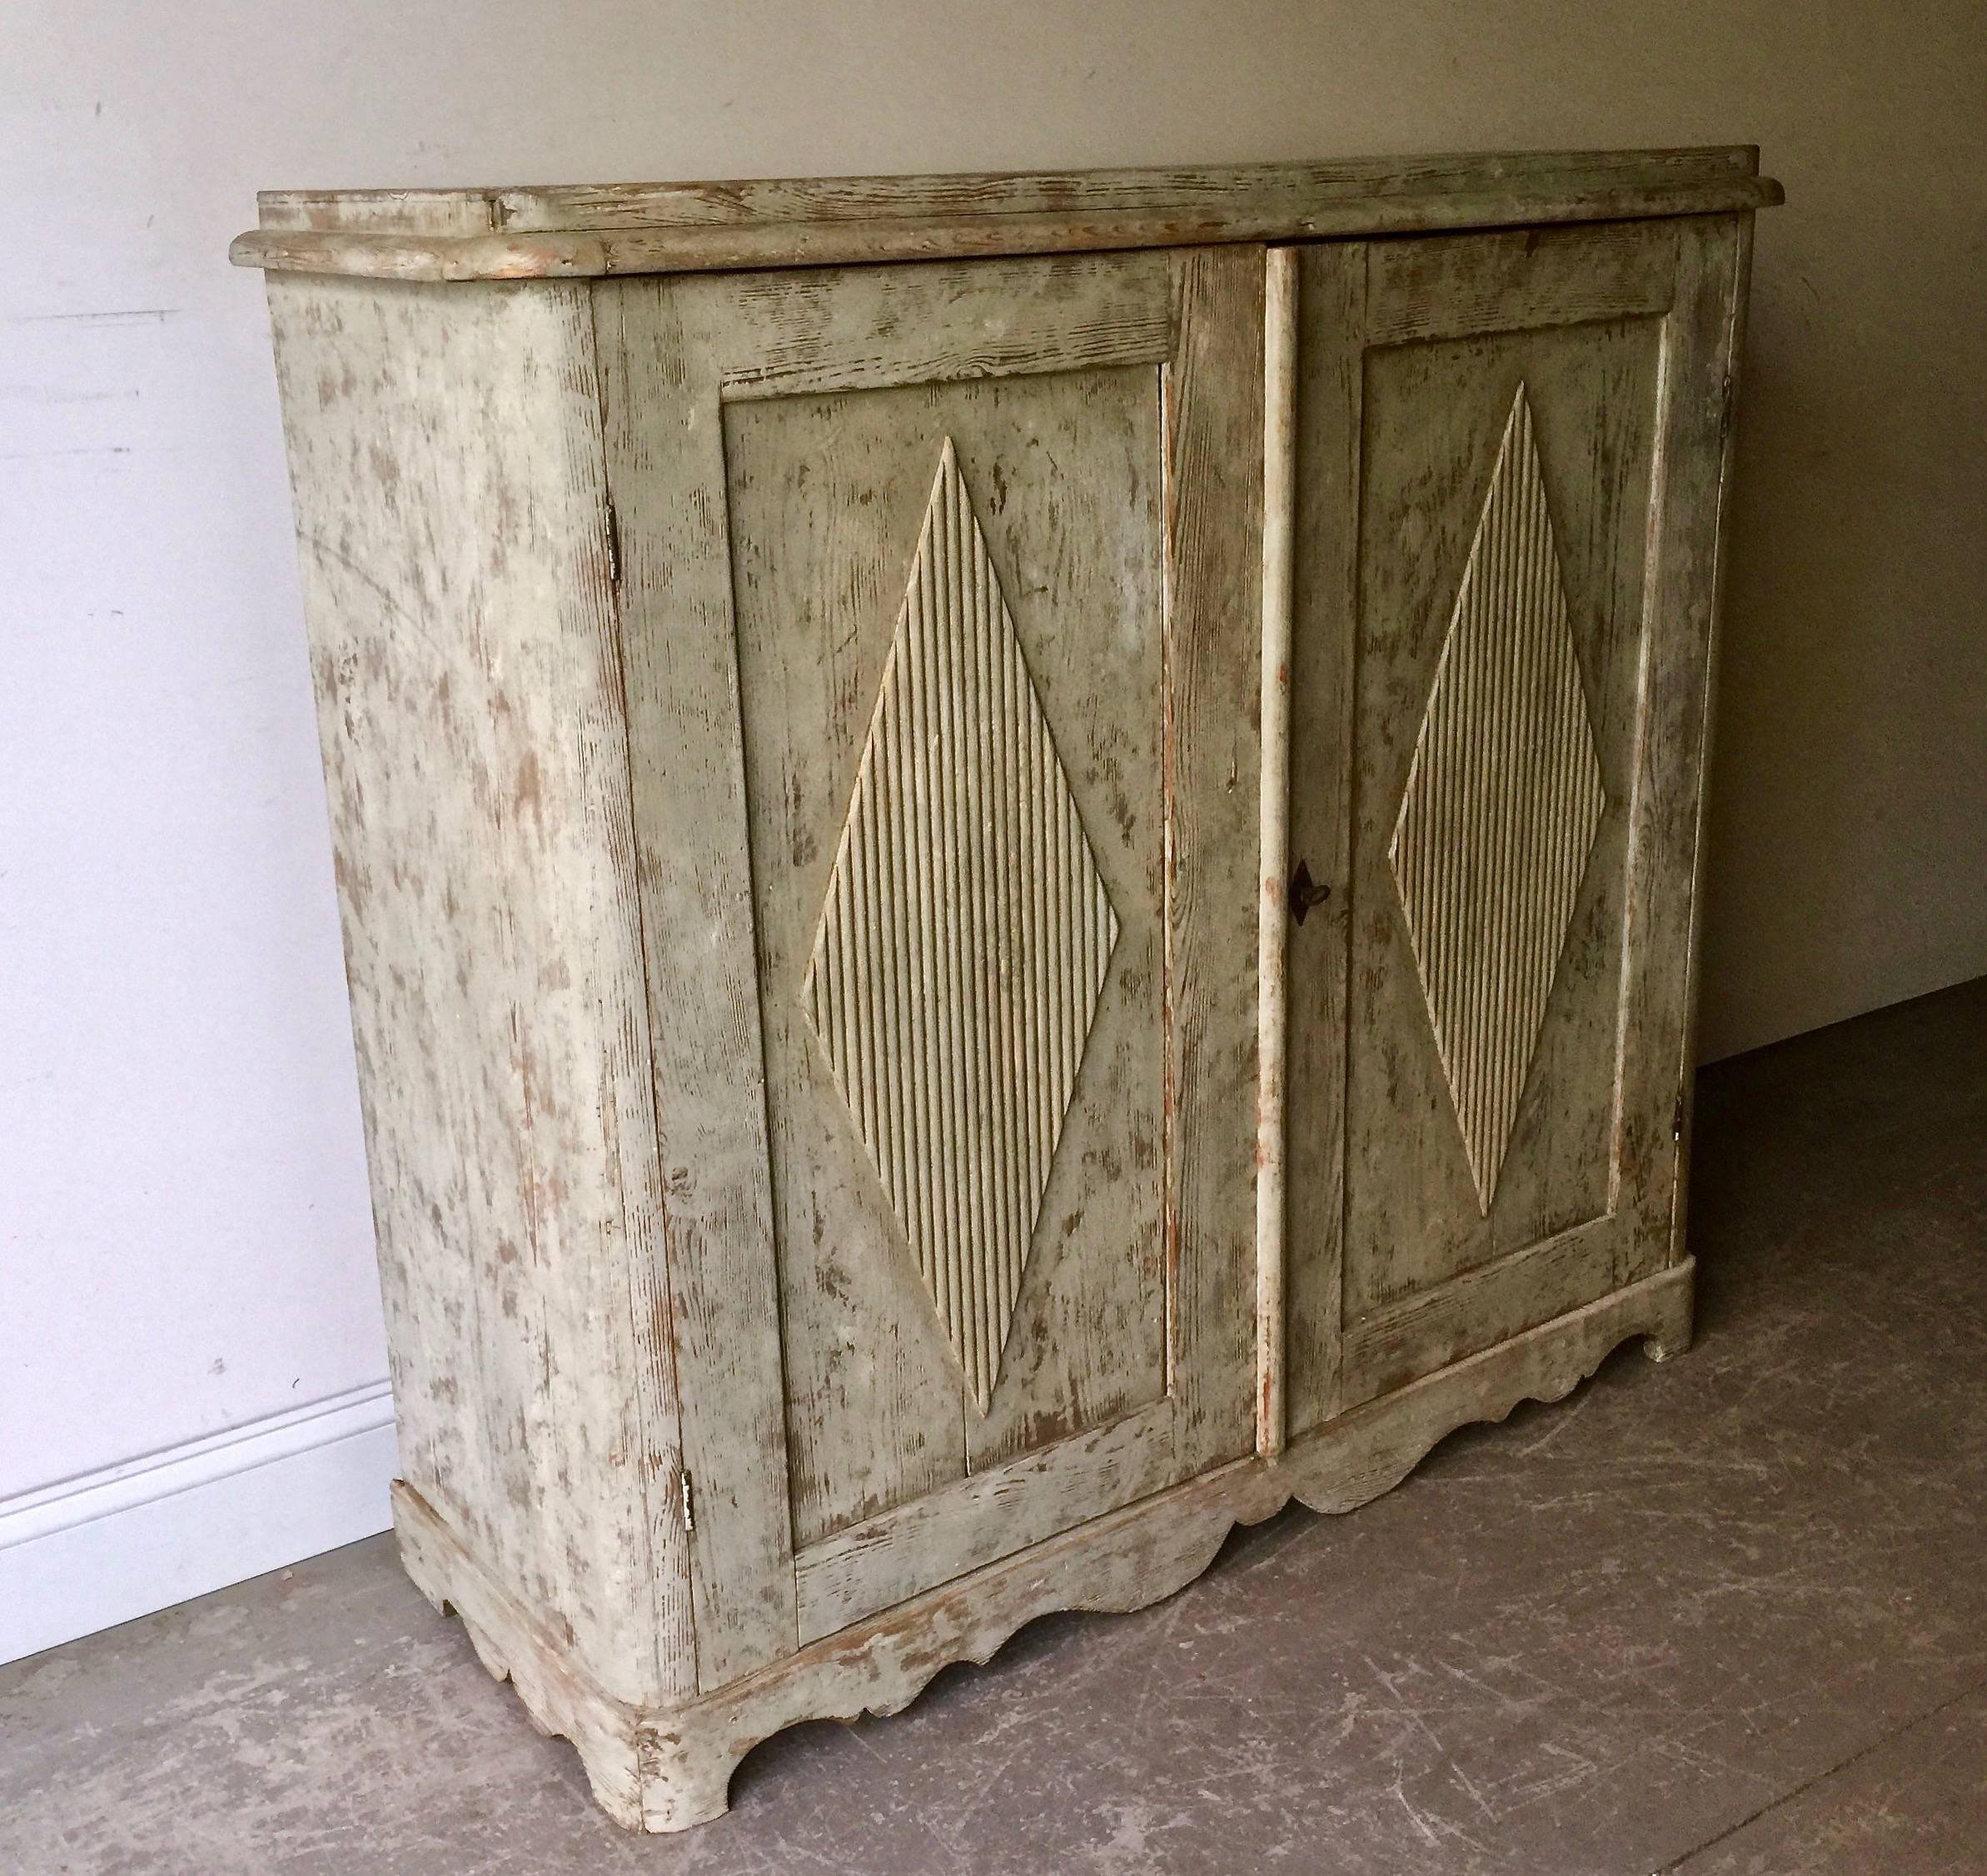 19th century Swedish Gustavian sideboard with classic Gustavian motifs; diamond shaped panelled doors on beautifully scallop-shaped apron. Inside with two shelves and two drawers. Scraped back to remnants of its original cream/greenish/ paint.